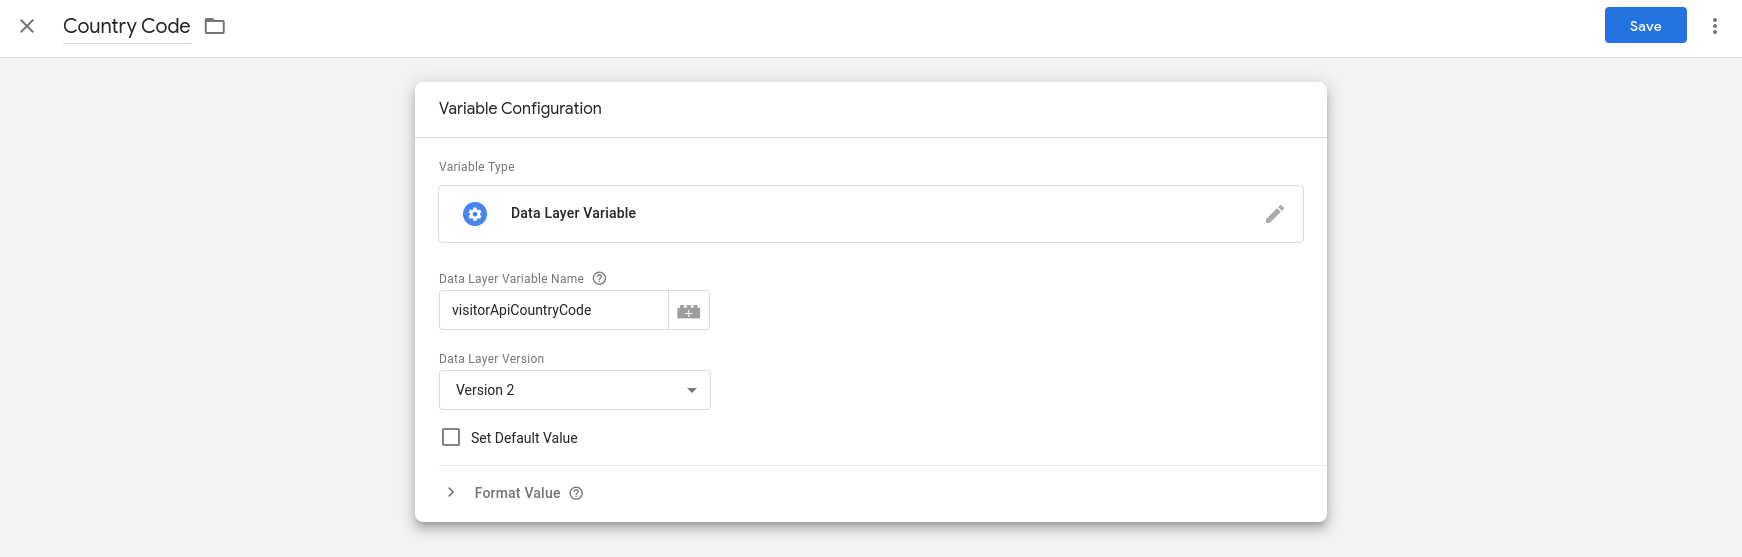 Create VisitorAPI variables in Google Tag Manager